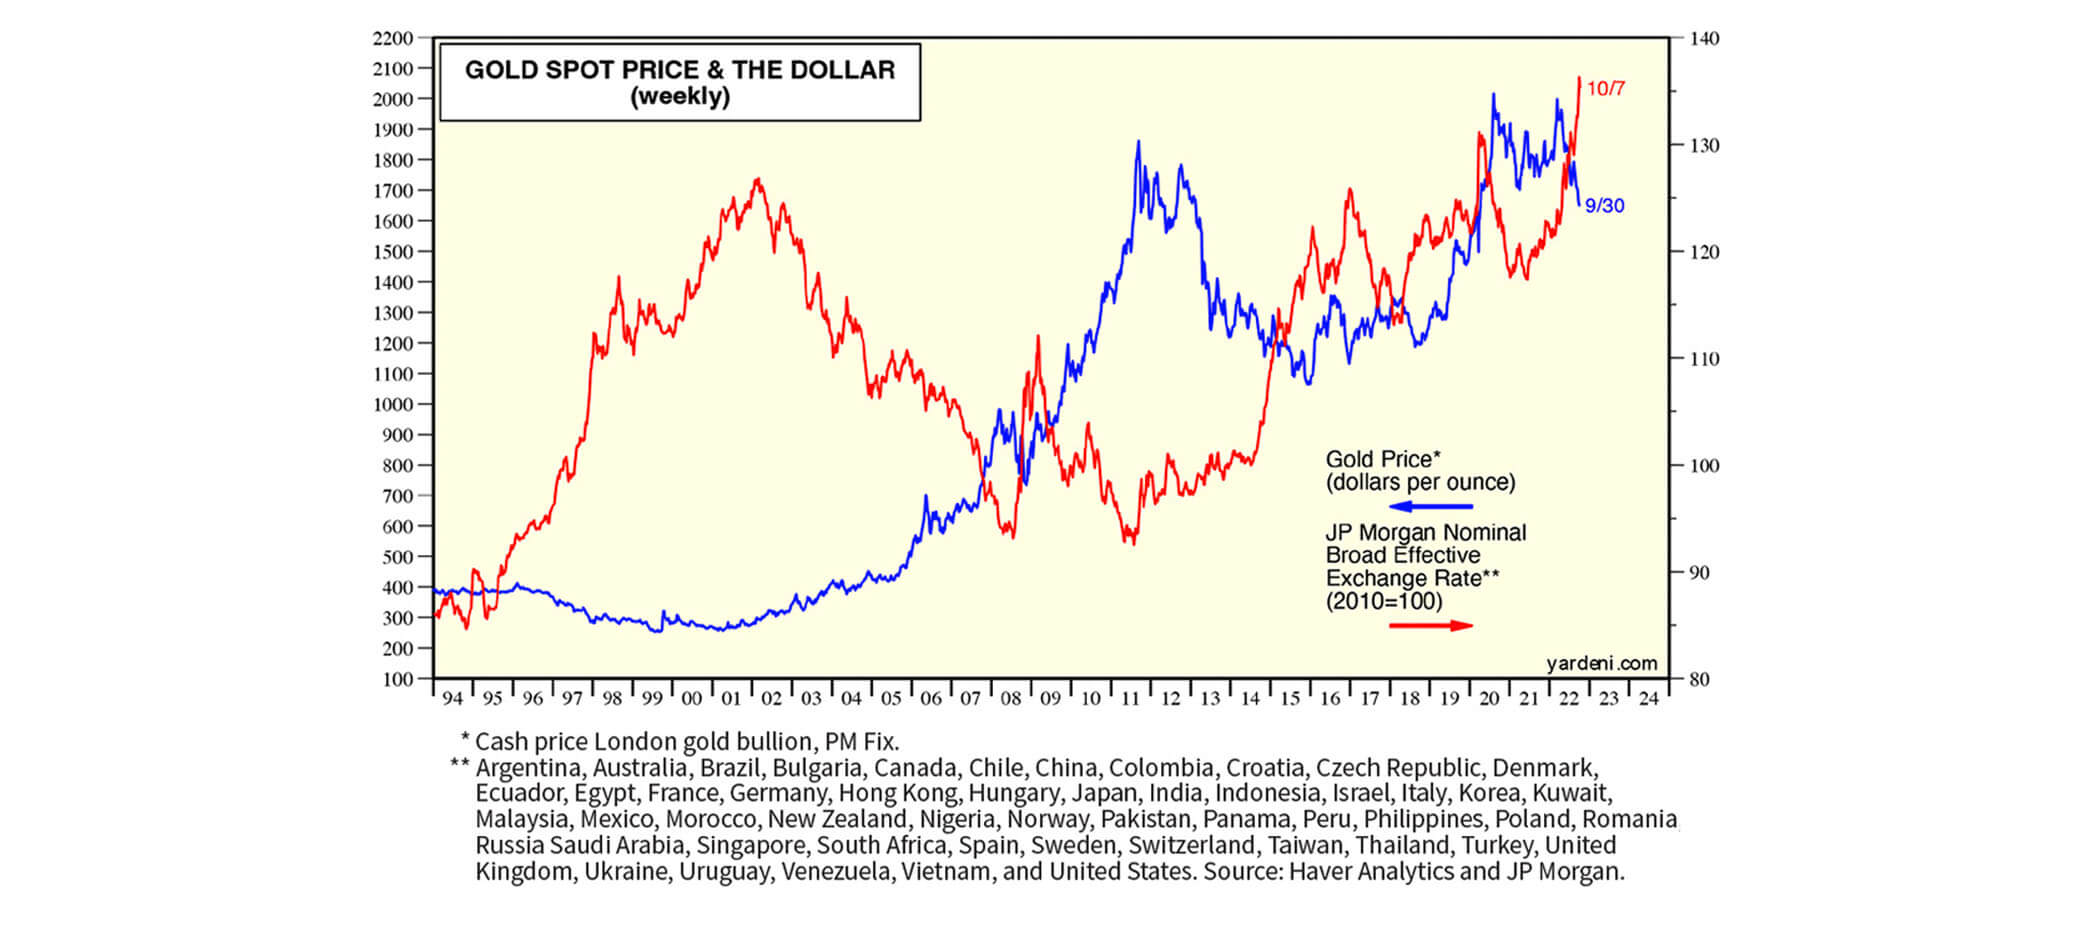 A graph showing the Gold Spot Price compared to the dollar on a weekly basis.